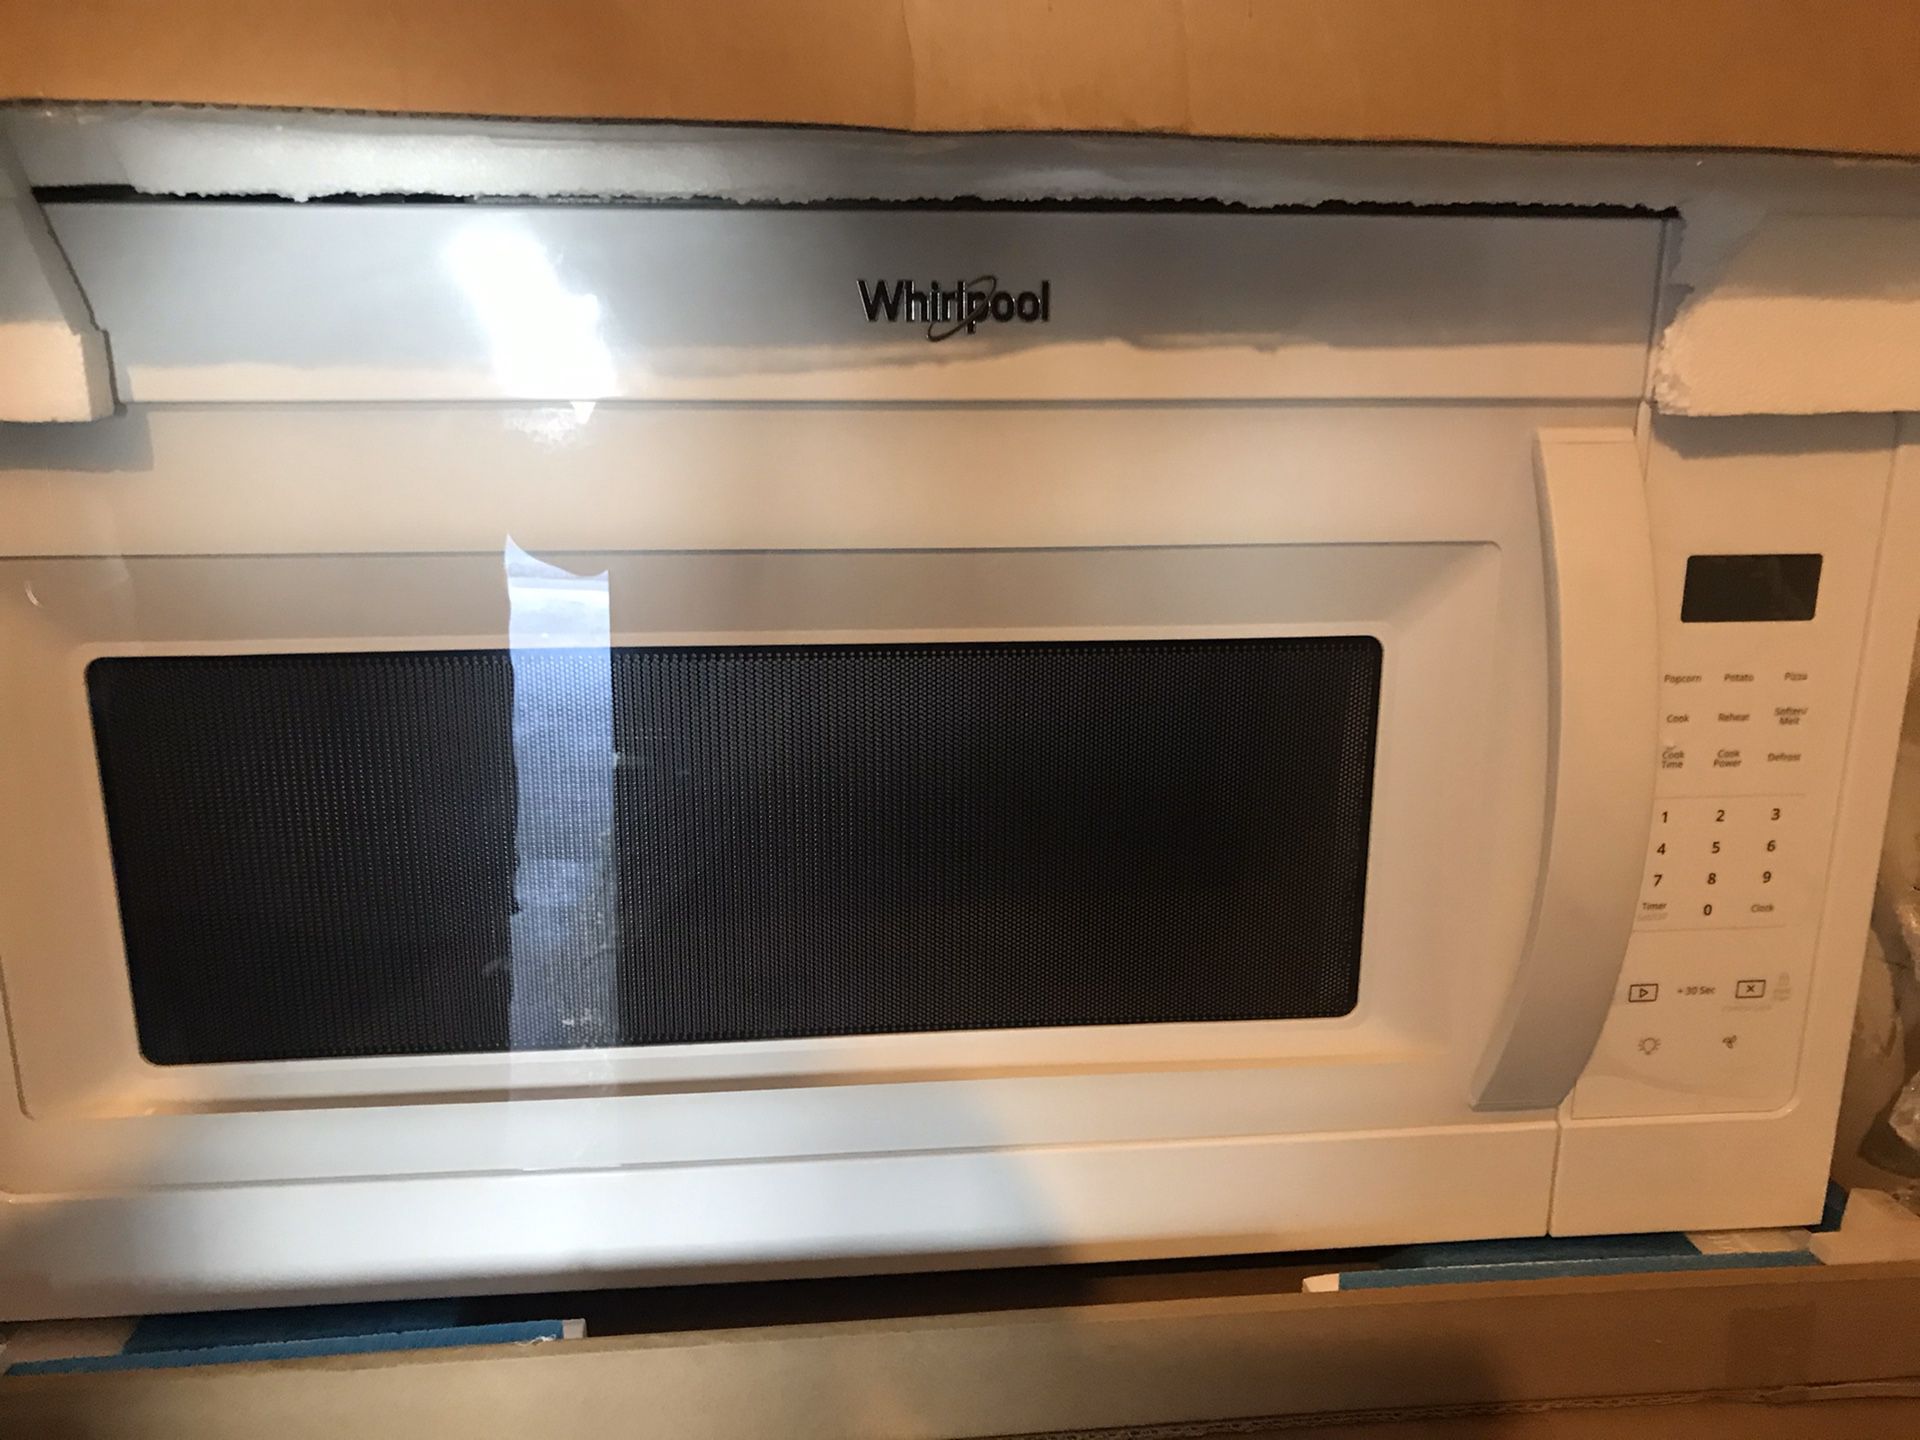 New Whirlpool microwave with the fan / over the range microwave